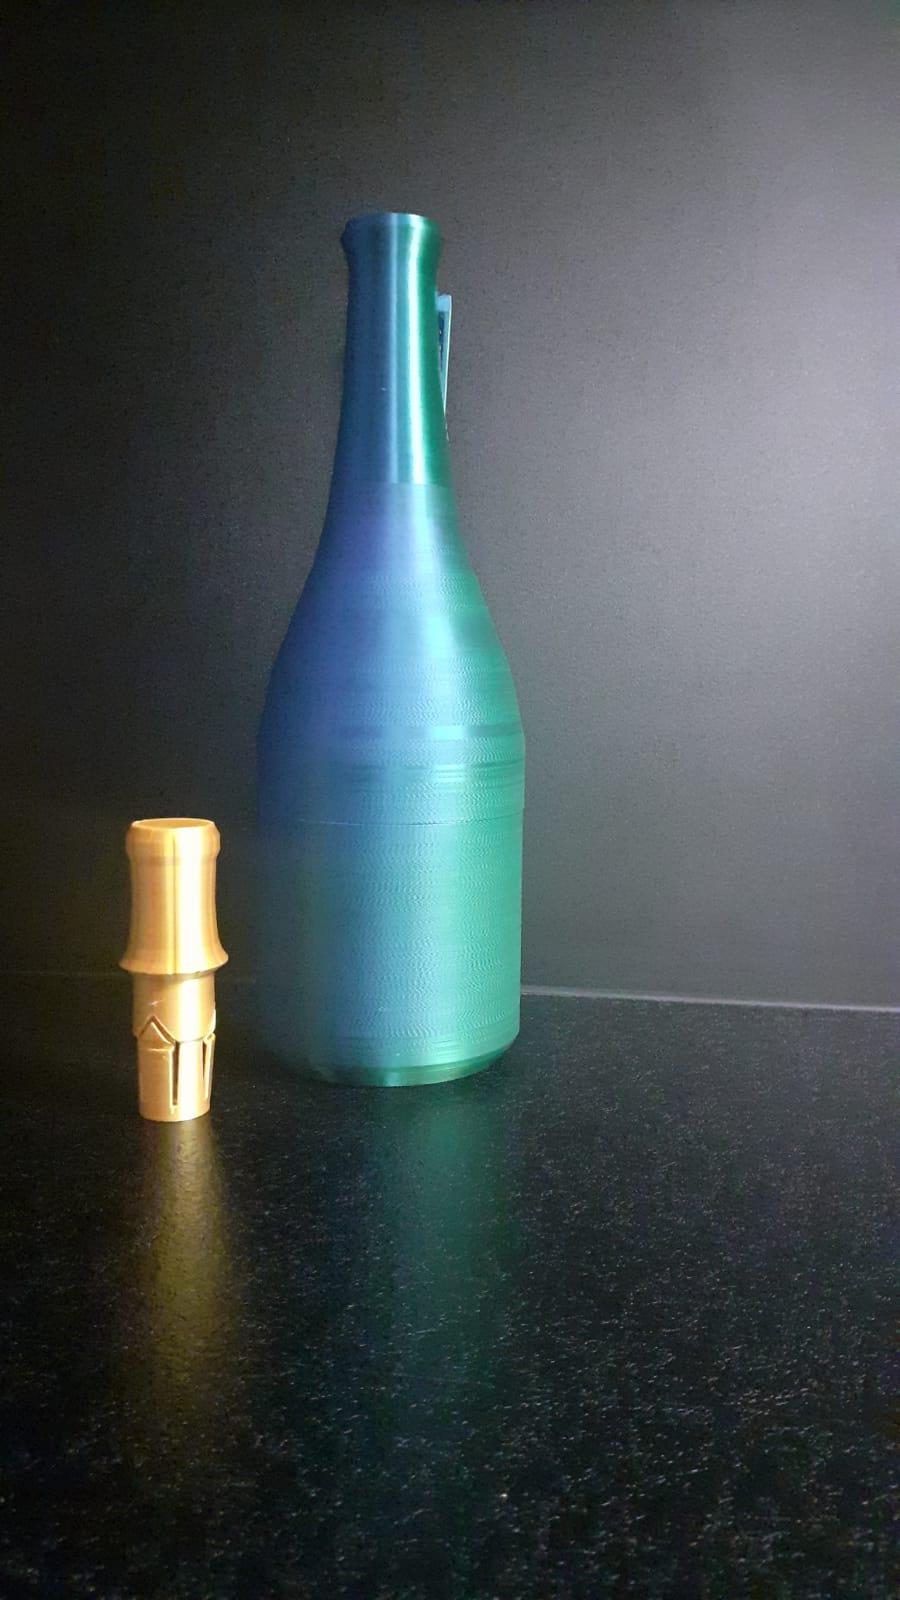 New Years Champagne bottle with shootable cork 3d model